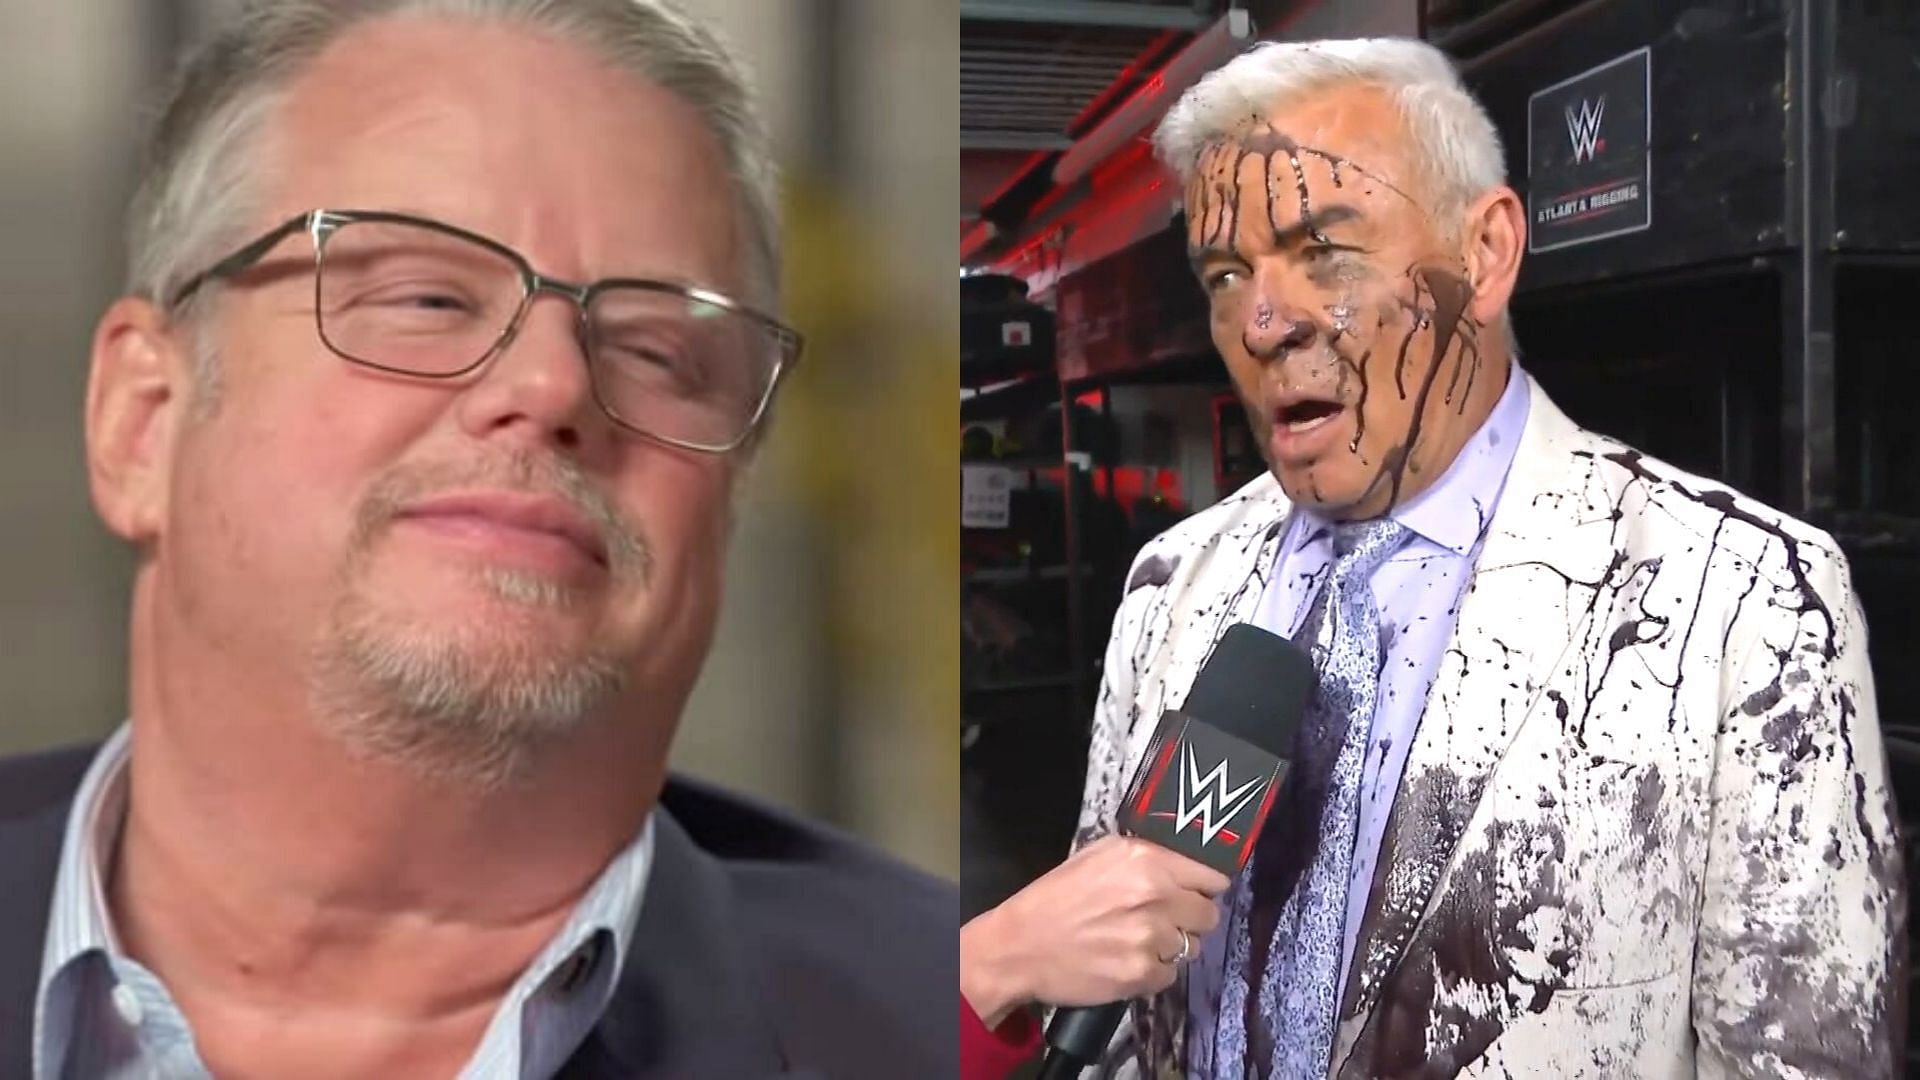 Did Bruce Prichard play a role in getting Eric Bischoff back on RAW?